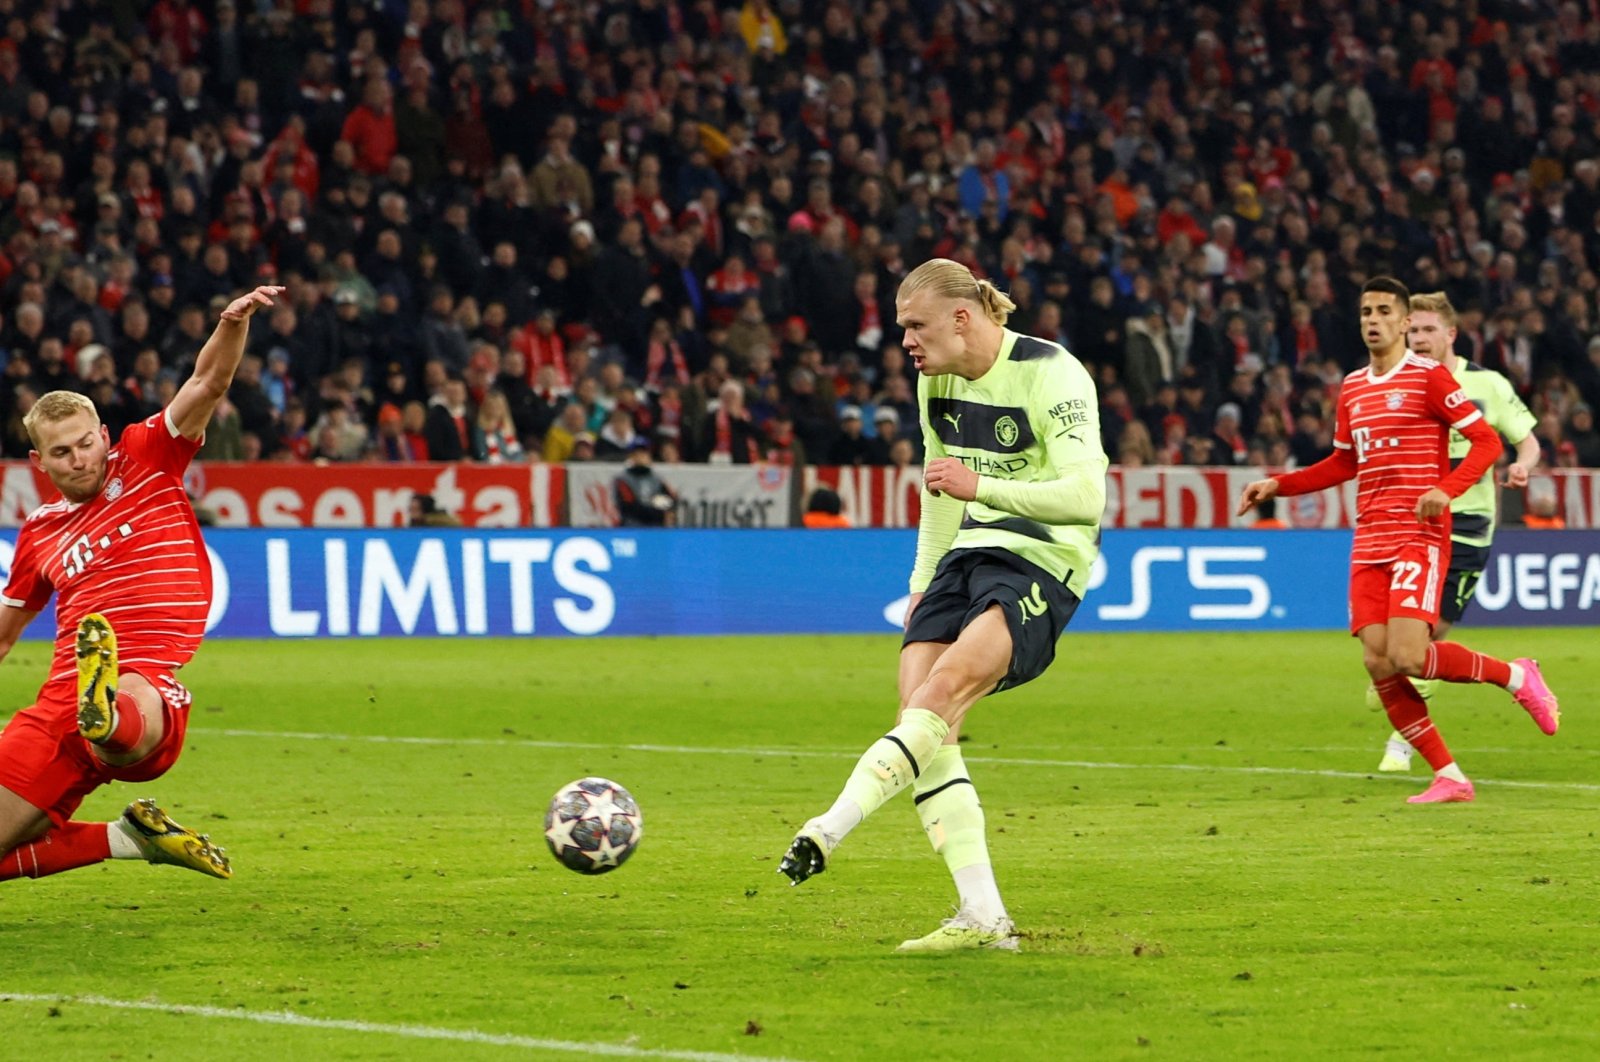 Manchester City&#039;s Erling Braut Haaland scores their first goal against Bayern Munich during the Champions League quarterfinals second leg tie at the Allianz Arena, Munich, Germany, April 19, 2023. (Reuters Photo)